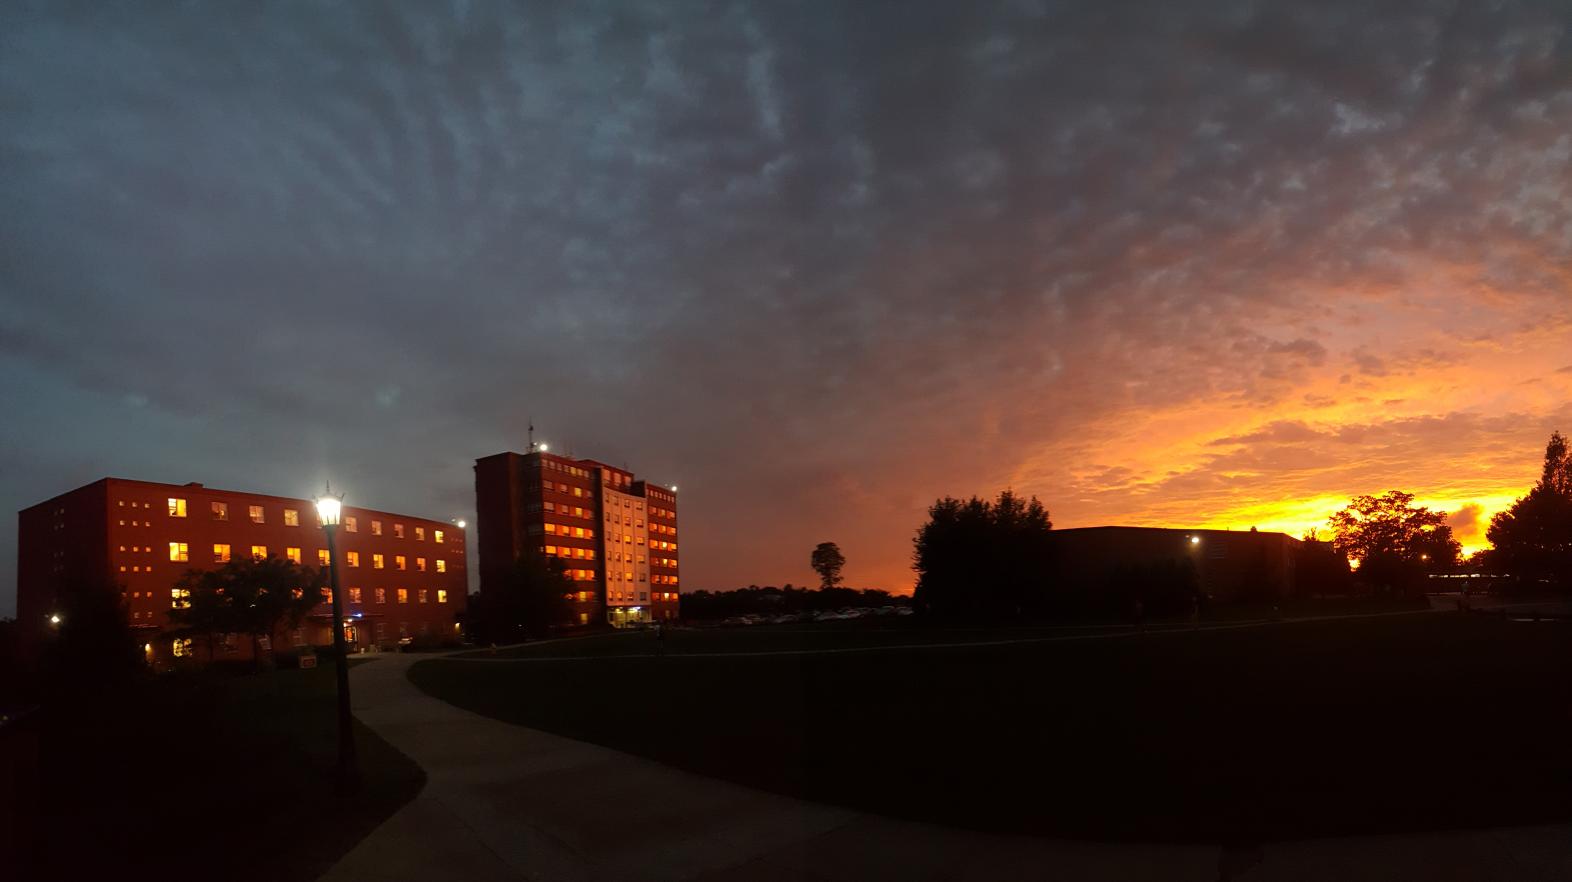 The sunsets near International Hall are unparalleled as shown in this photo by Springfield College student Bryttnie Thomas